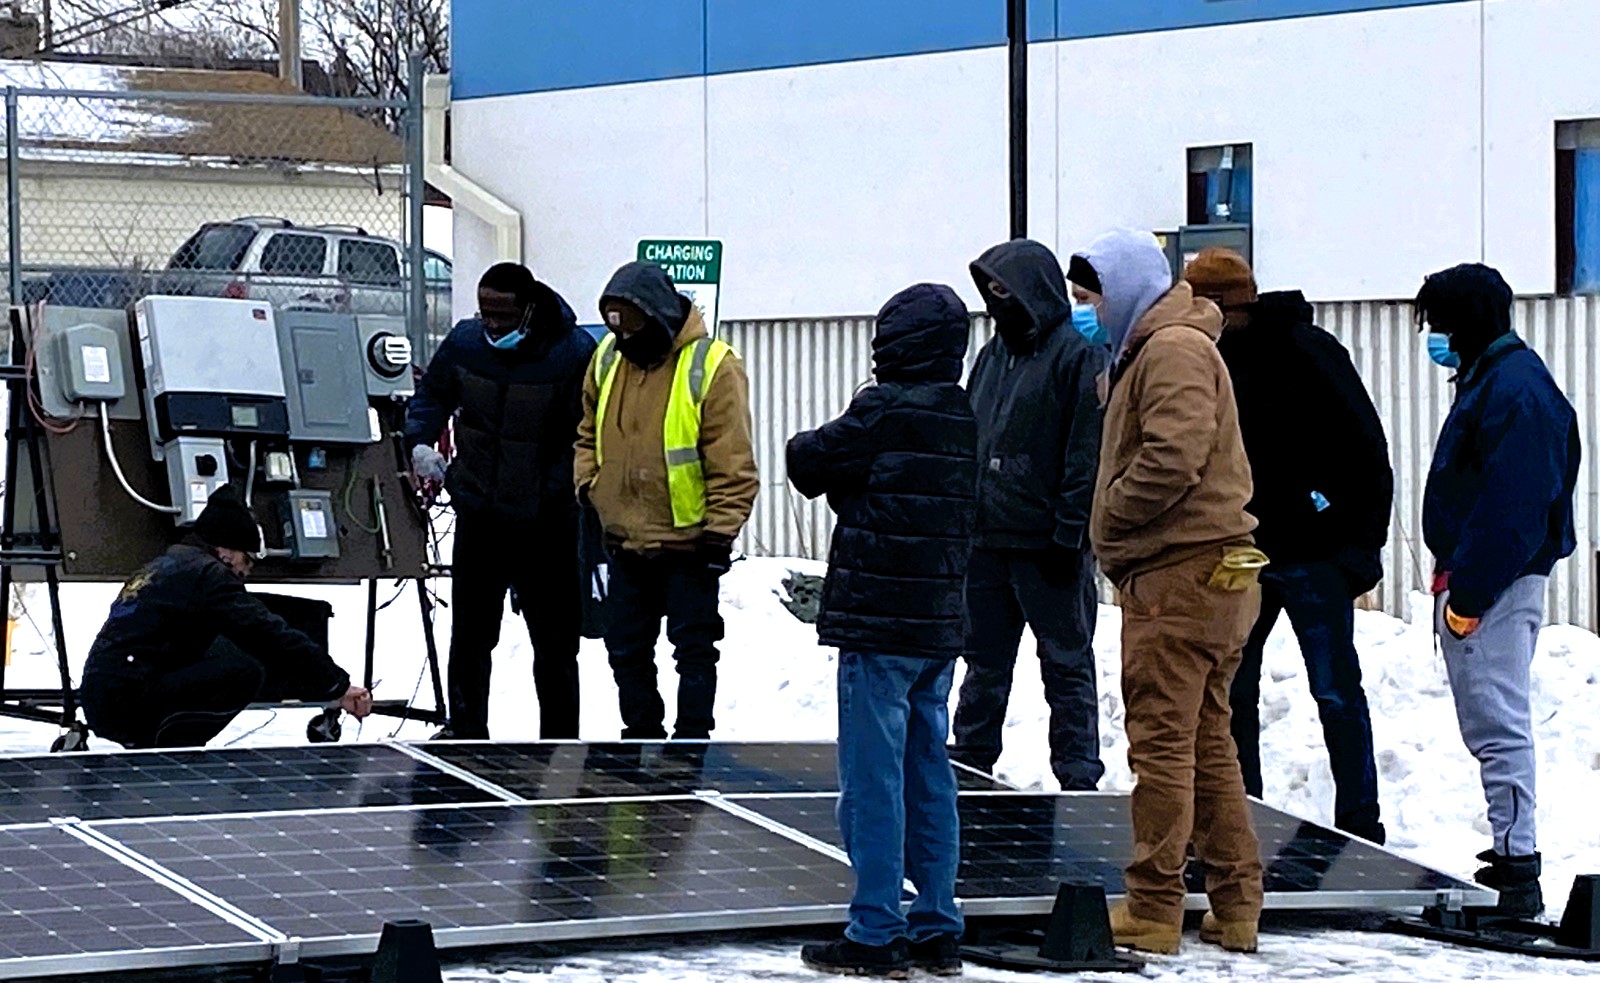 People standing by solar panel.